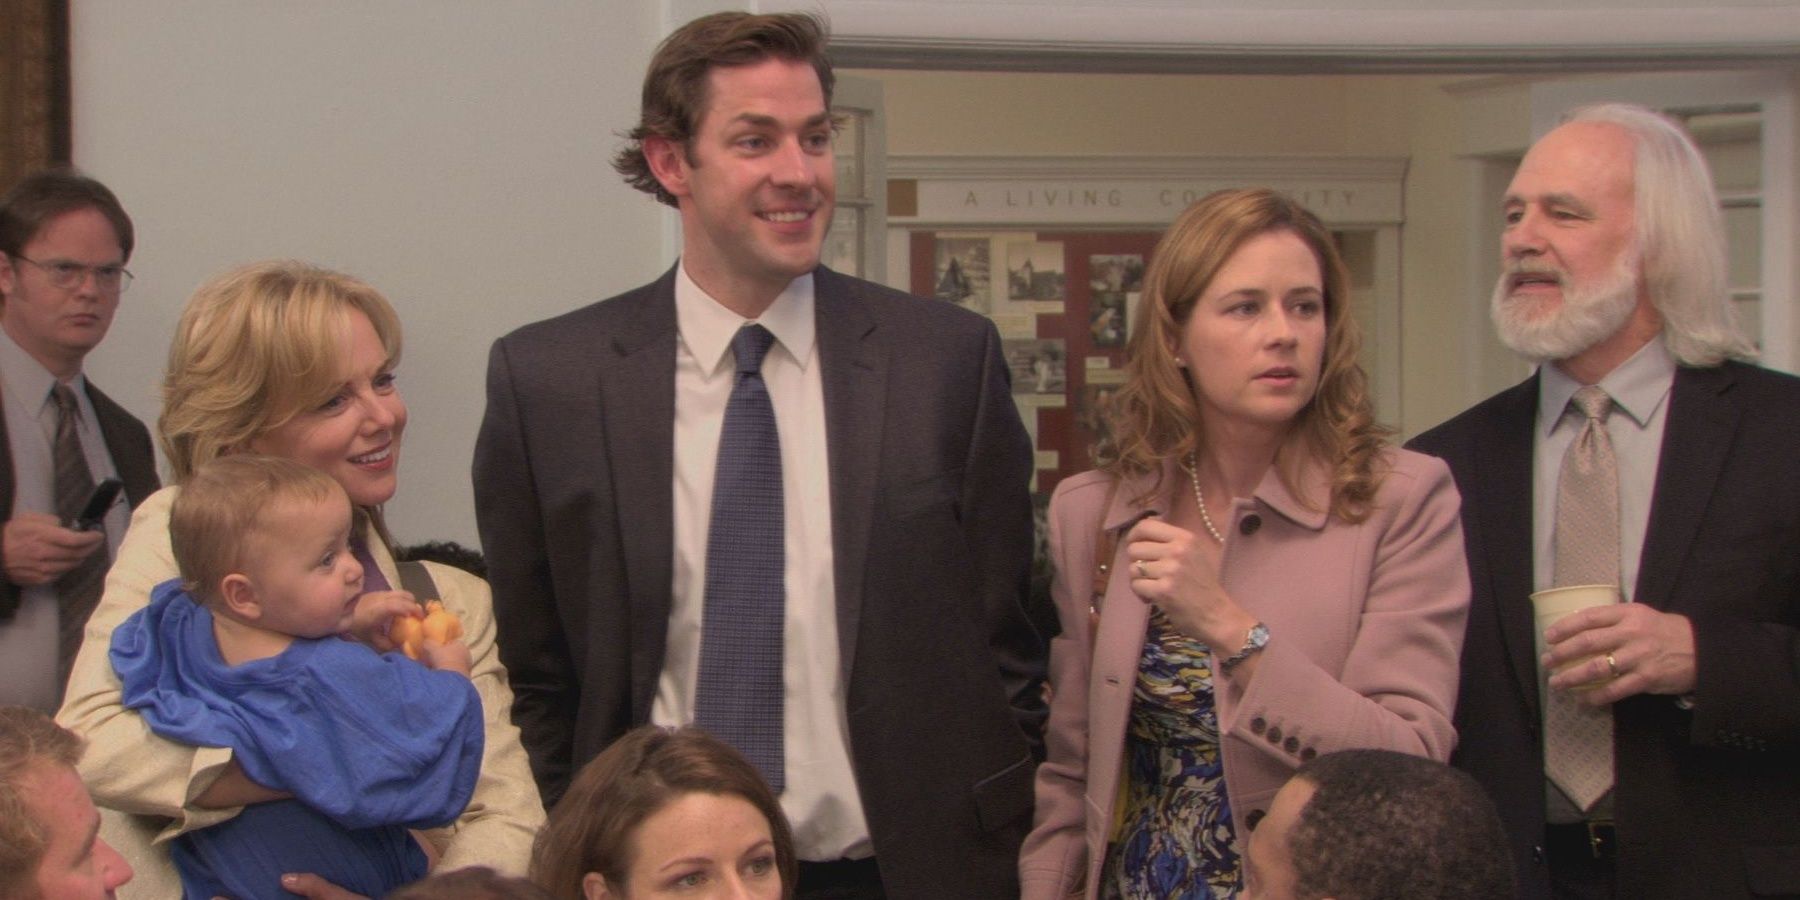 Jim, Pam and their family at the christening in The Office